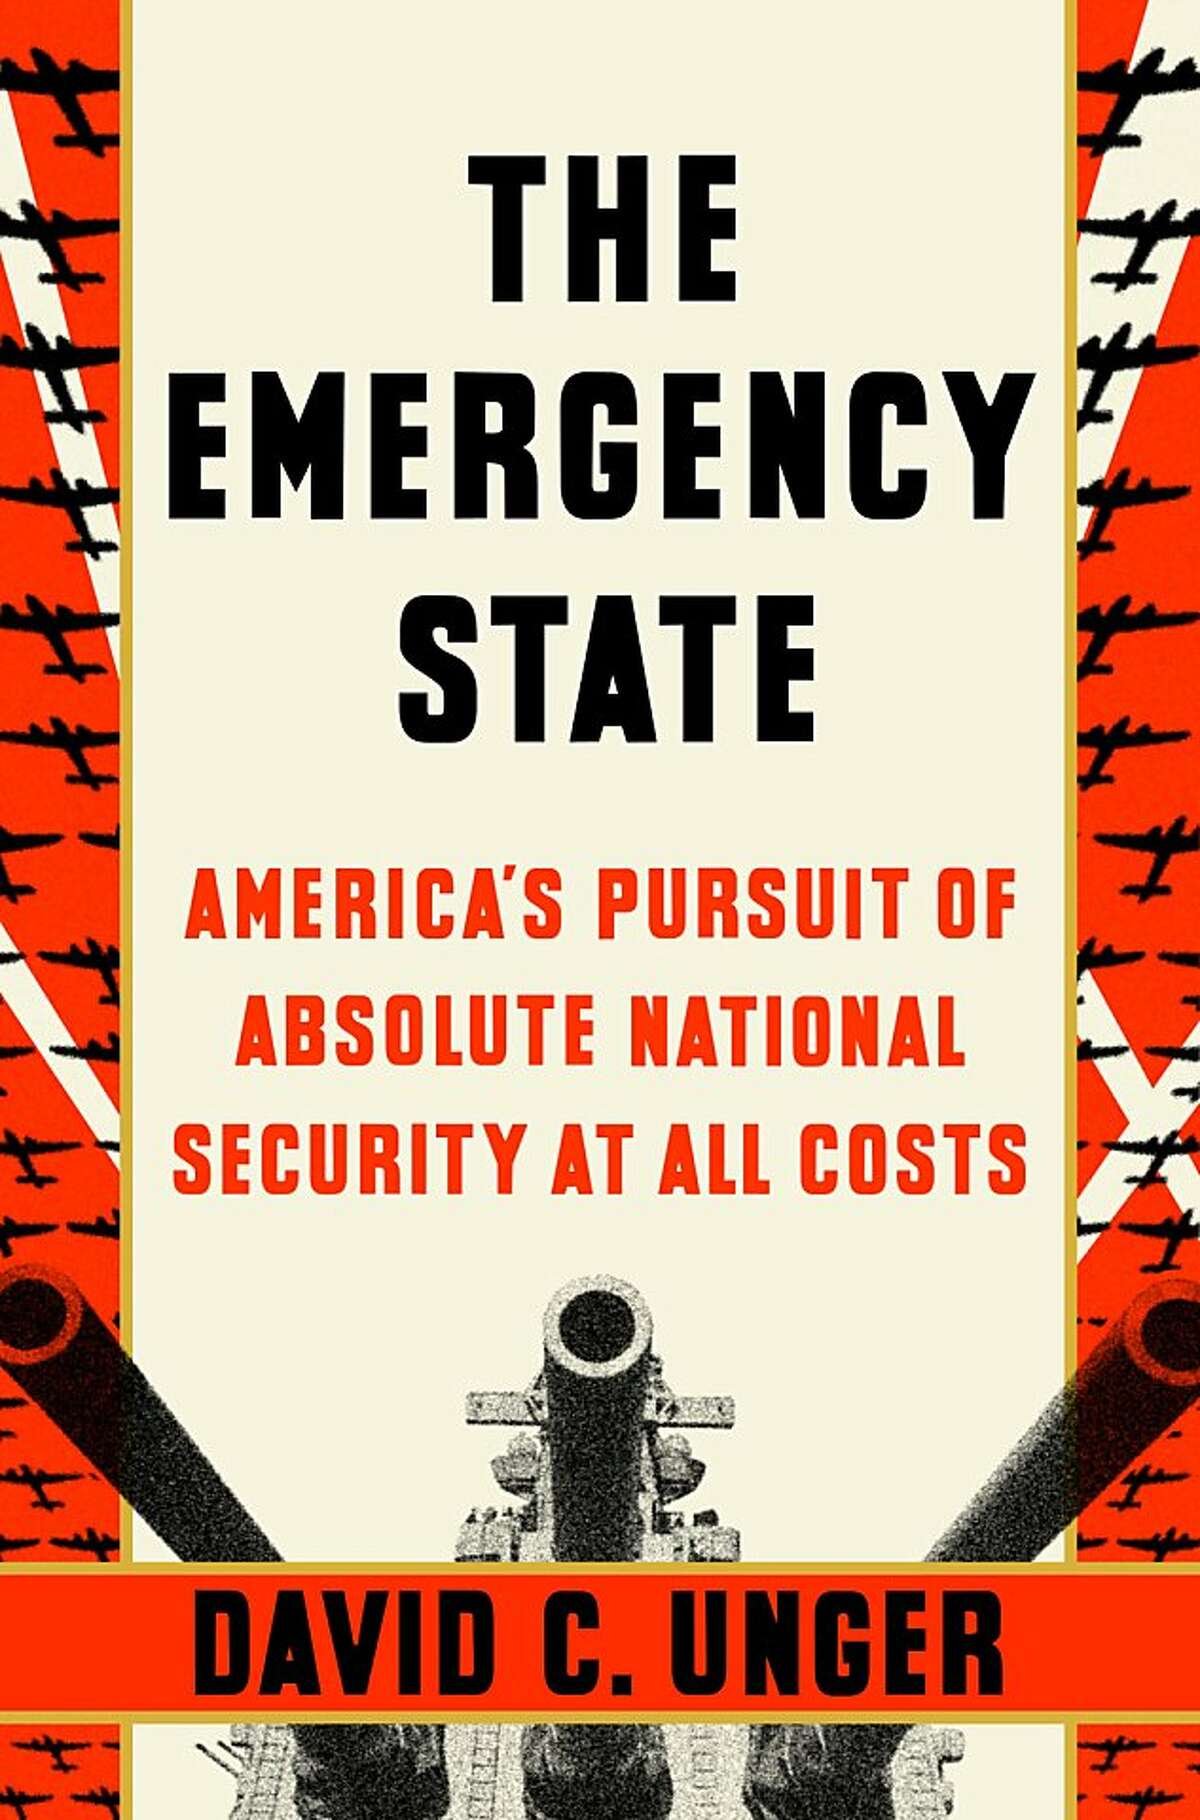 "The Emergency State: America's Pursuit of Absolute Security at All Costs" By David C. Unger